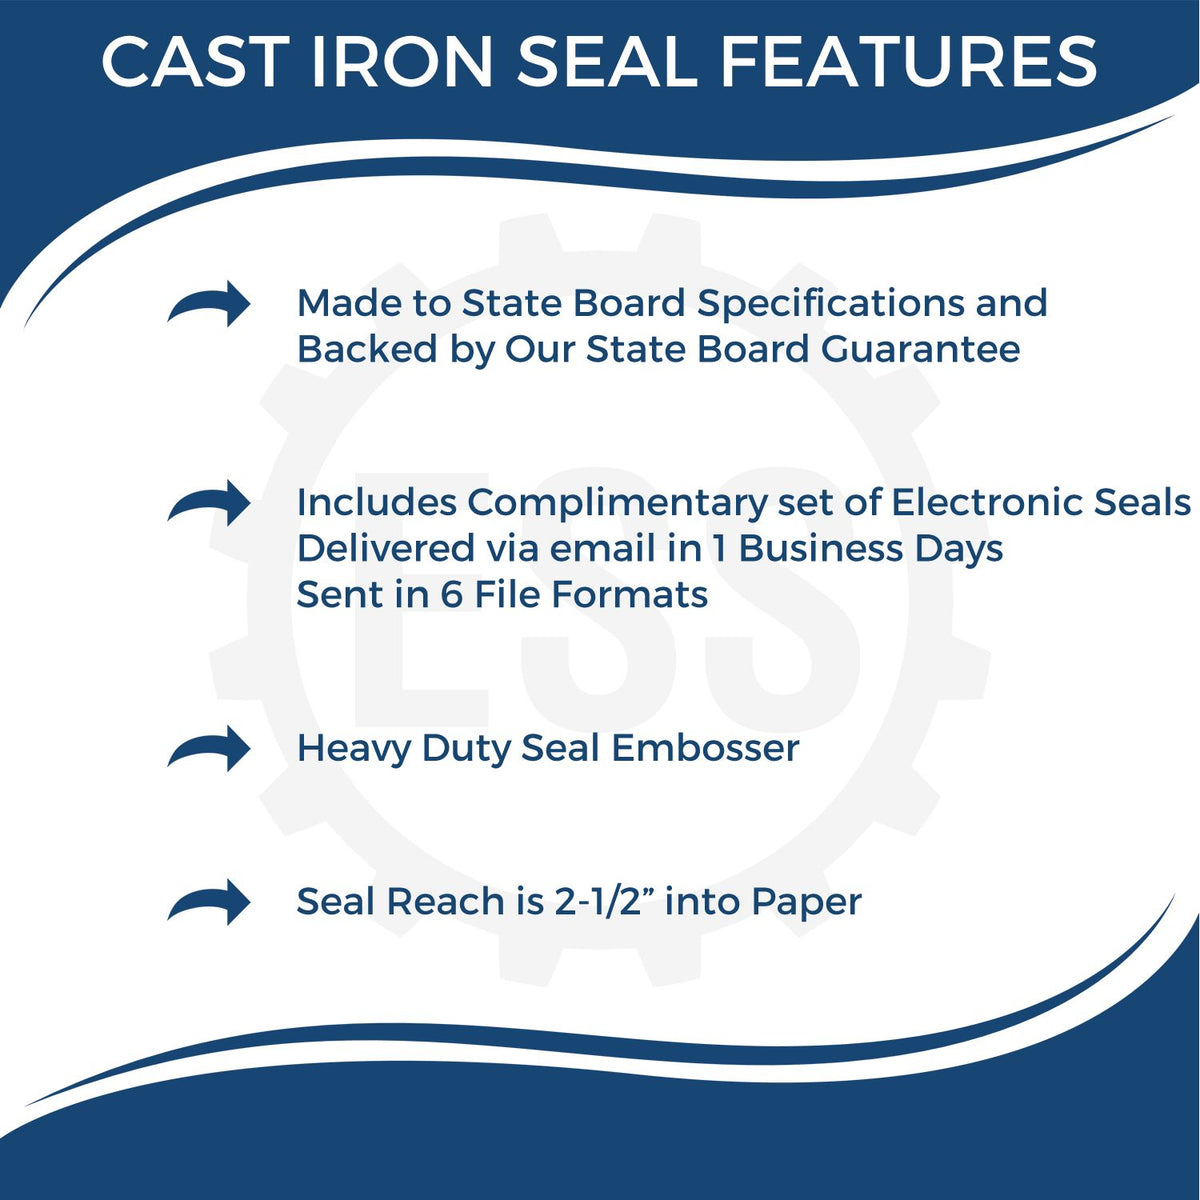 A picture of an infographic highlighting the selling points for the Heavy Duty Cast Iron Mississippi Geologist Seal Embosser